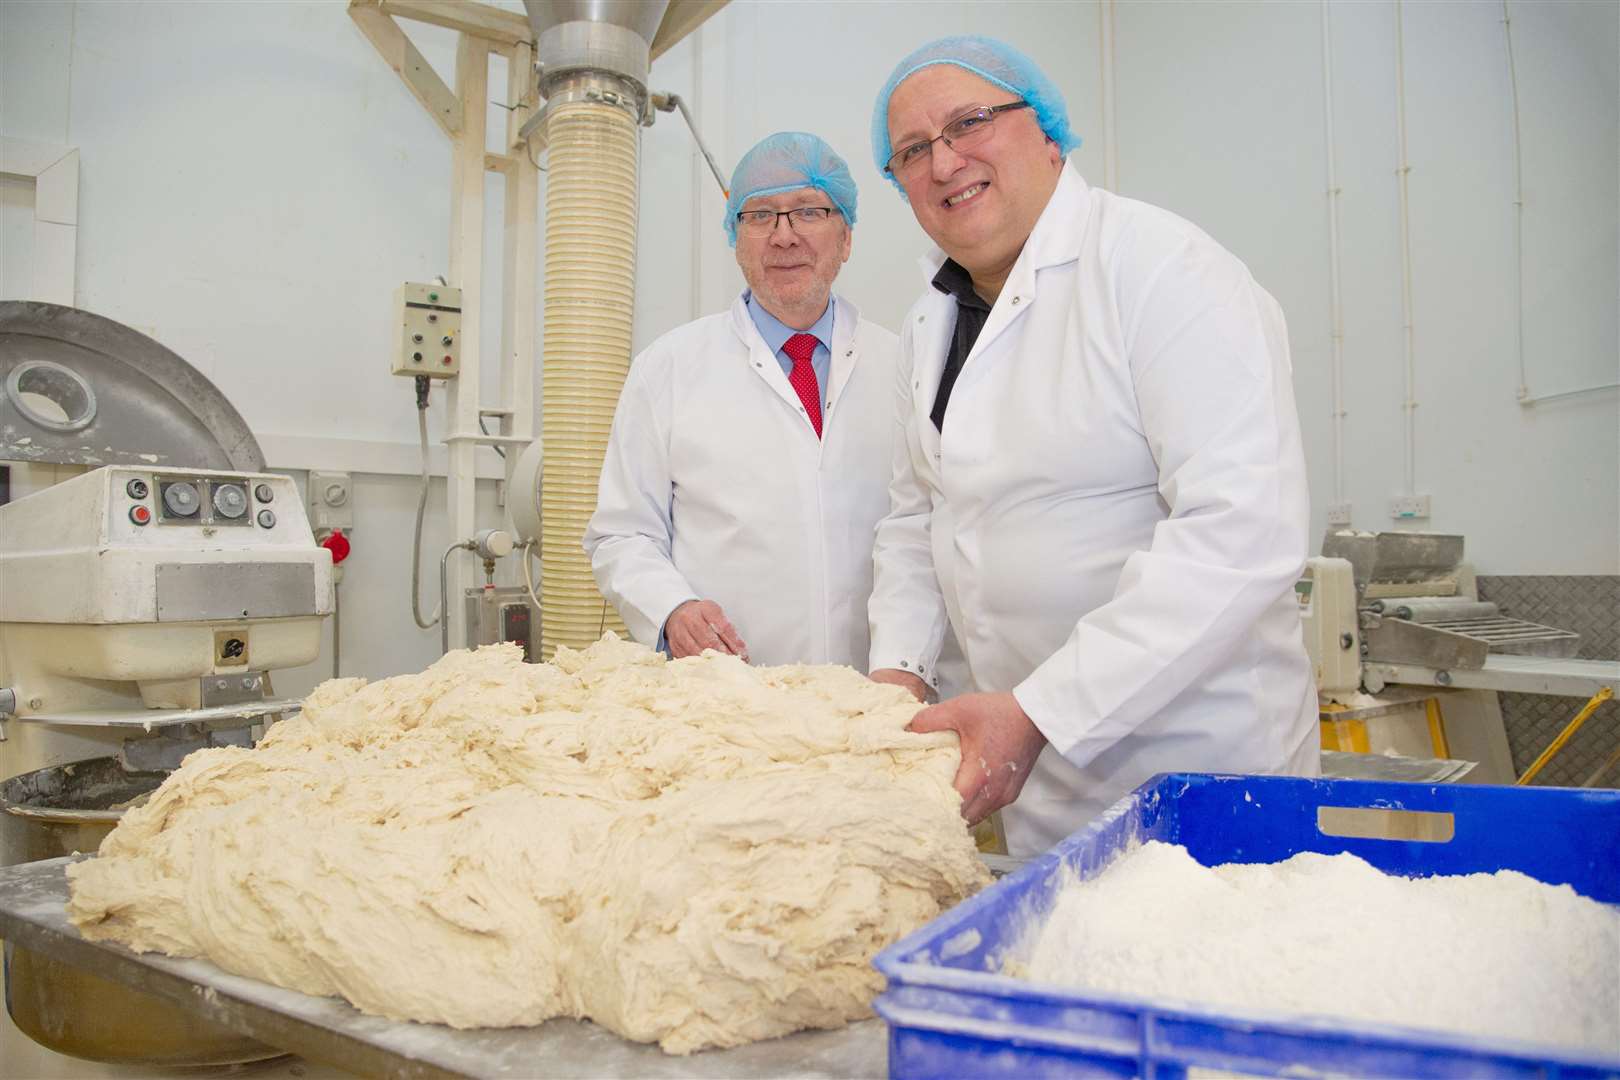 Cabinet Secretary for Constitutional Affairs, Michael Russell, visits the factory of MacLeanâs Bakery in Forres alongside Macleanâs Highland Bakery managing director, Lewis Maclean...Picture: Daniel Forsyth. Image No.043504.